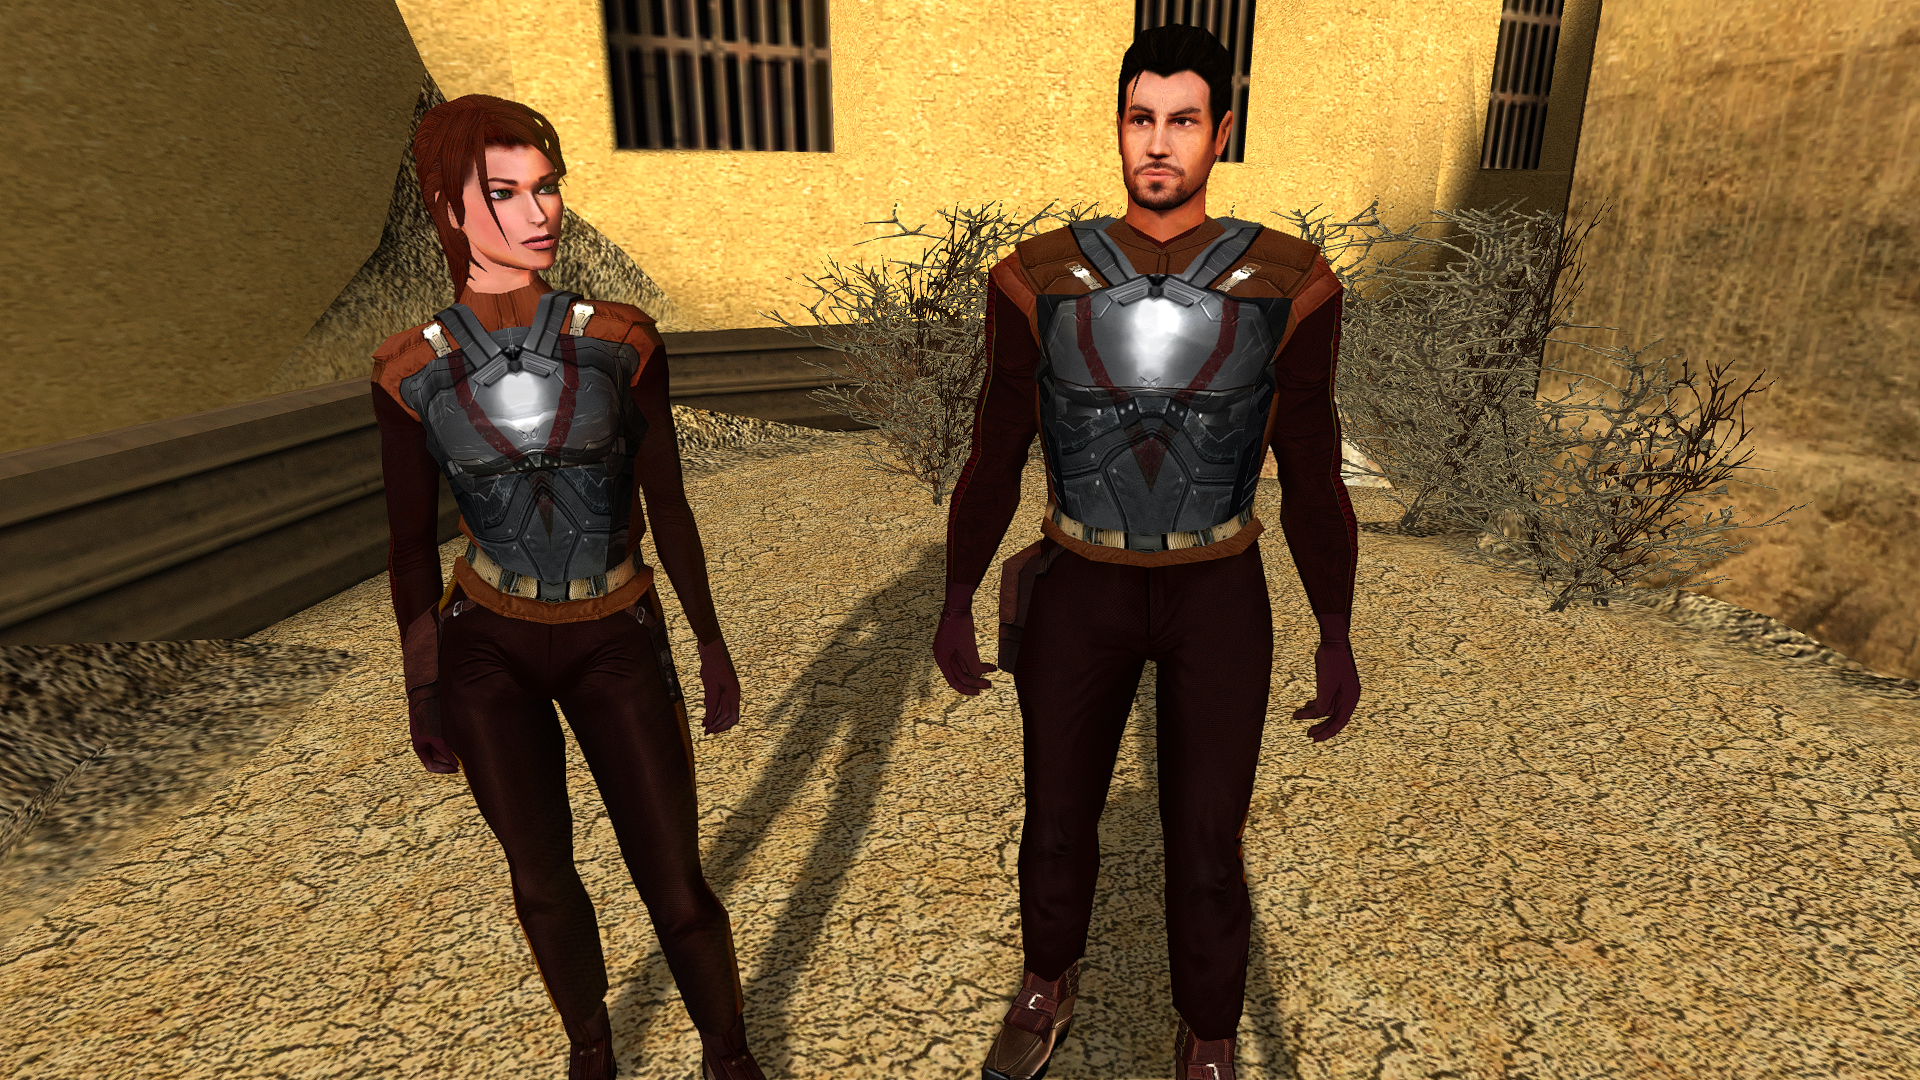 720470399_swkotor2024-01-0700-39-51.png.39eb7d4b5bce44159a2f44785c6a4732.png